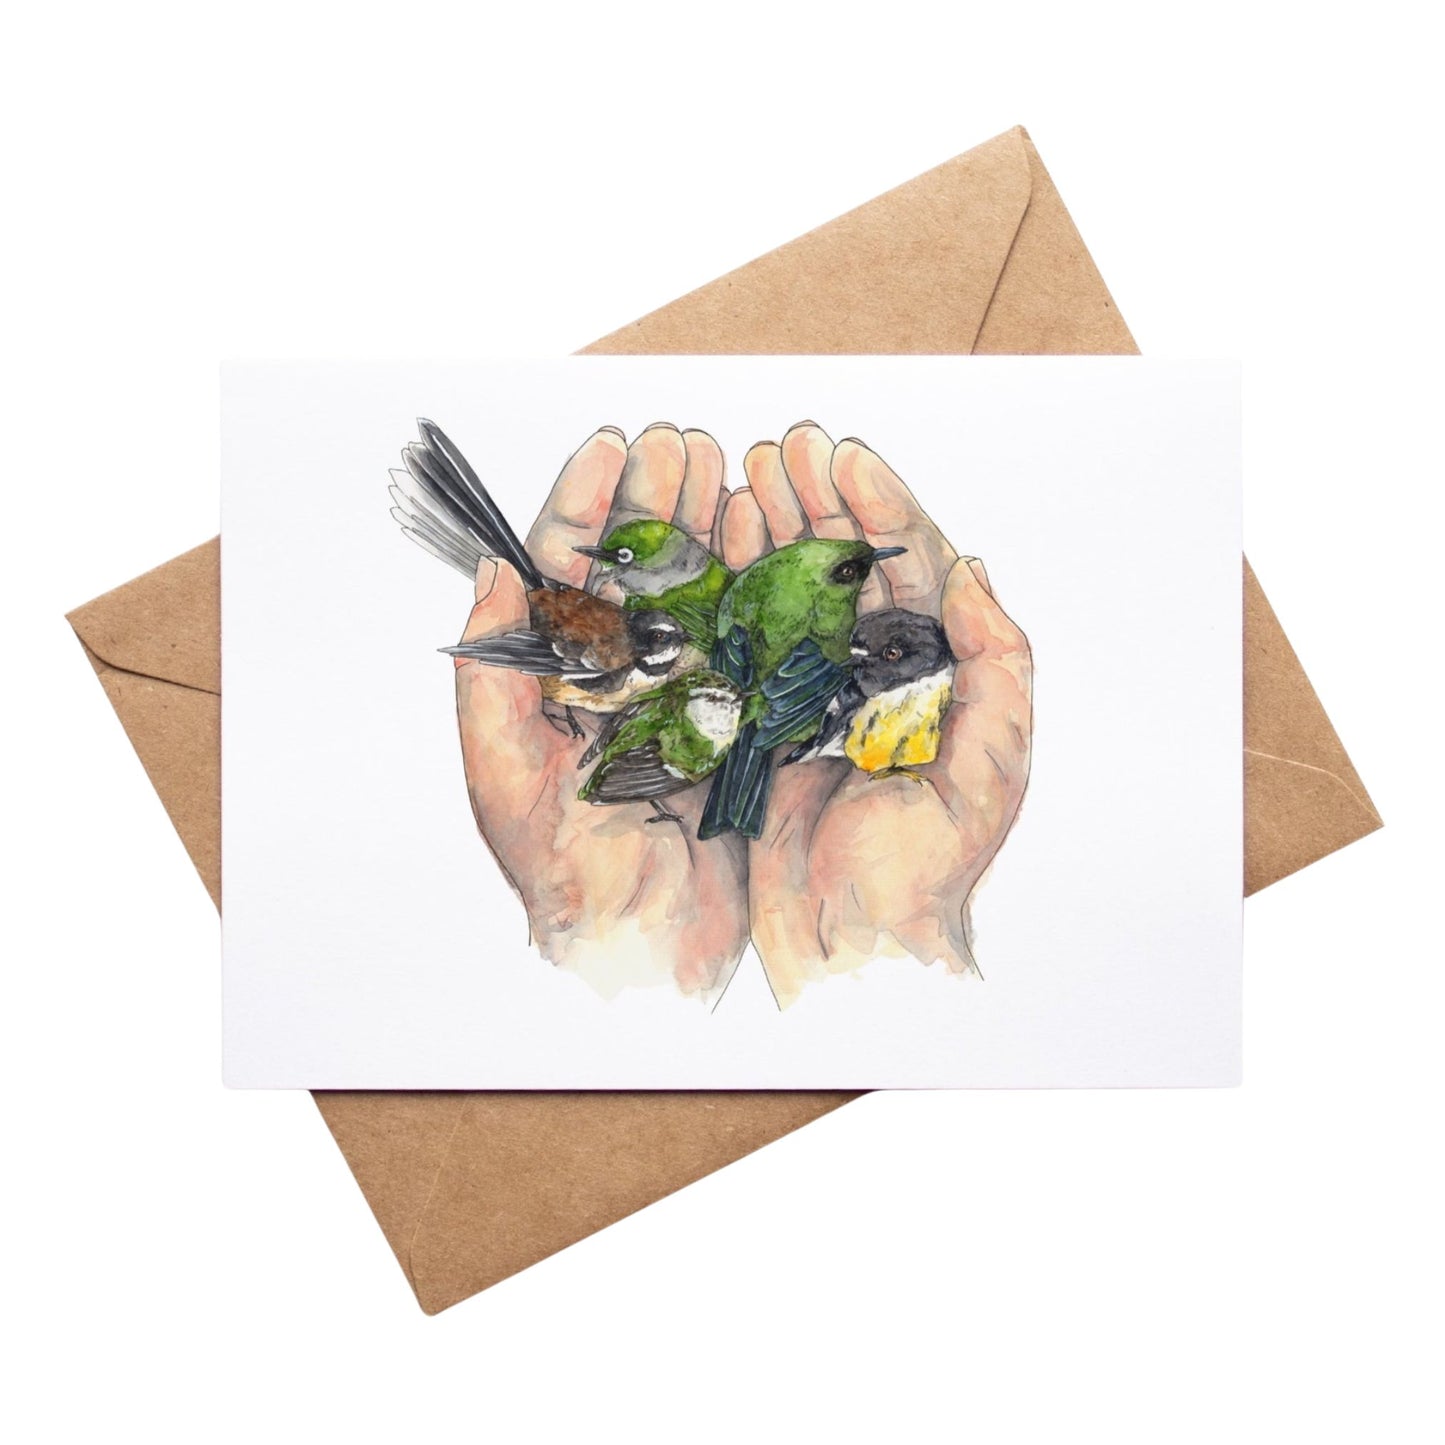 Greeting card by Leah Ingram Artist featuring 2 hands holding 5 small New Zealand native birds.